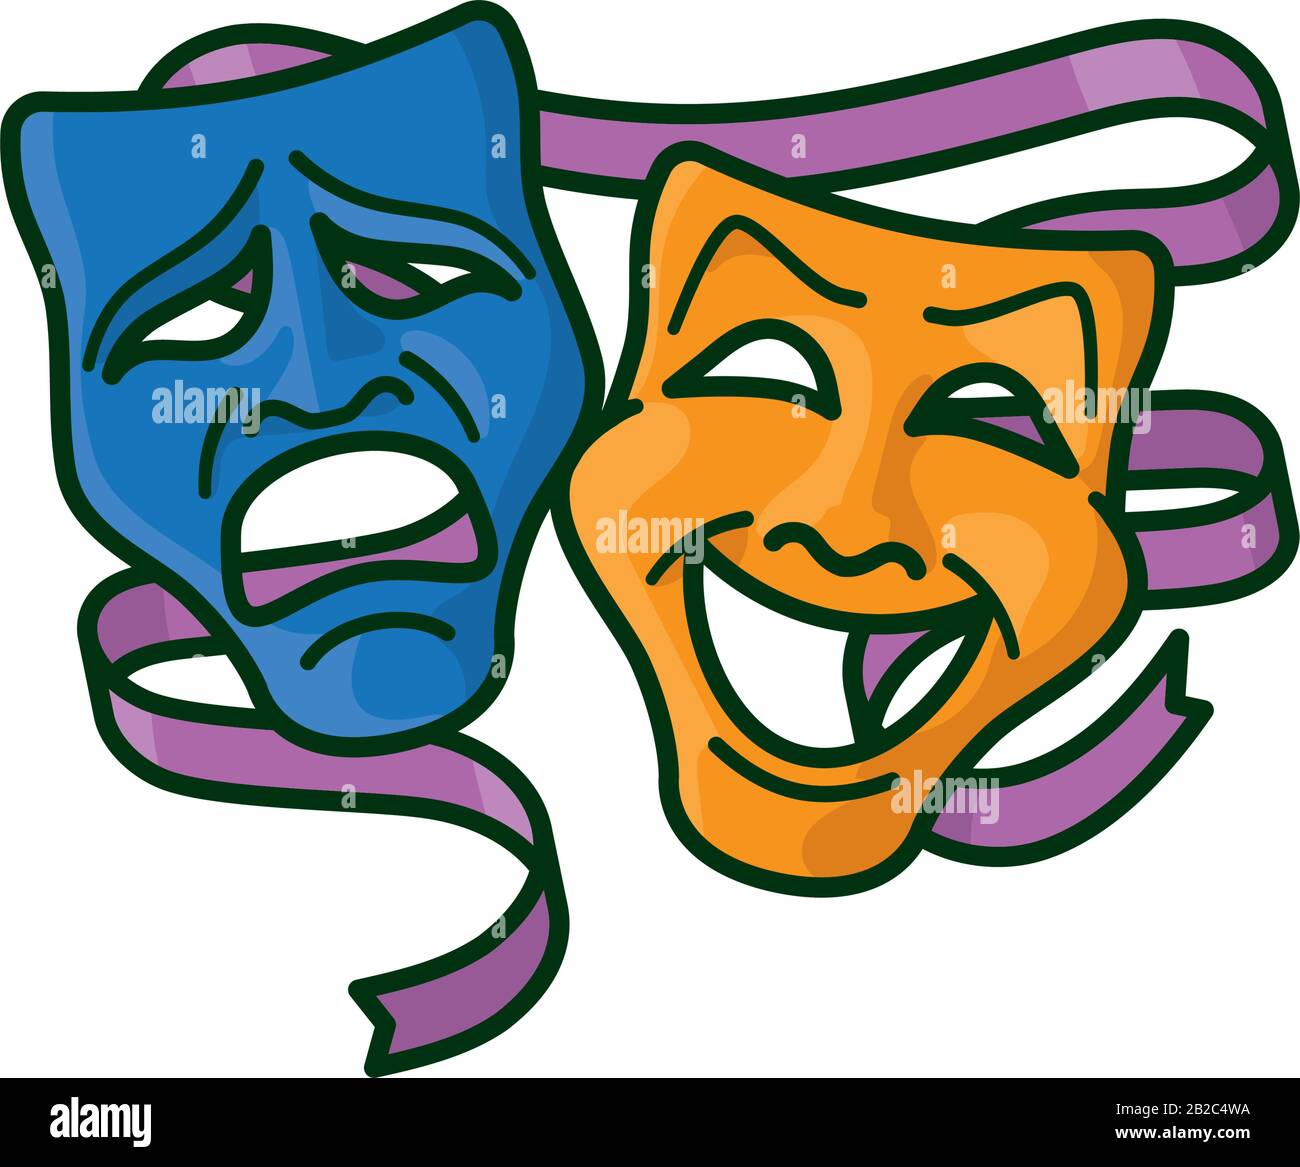 Comedy mask Stock Vector Images - Alamy